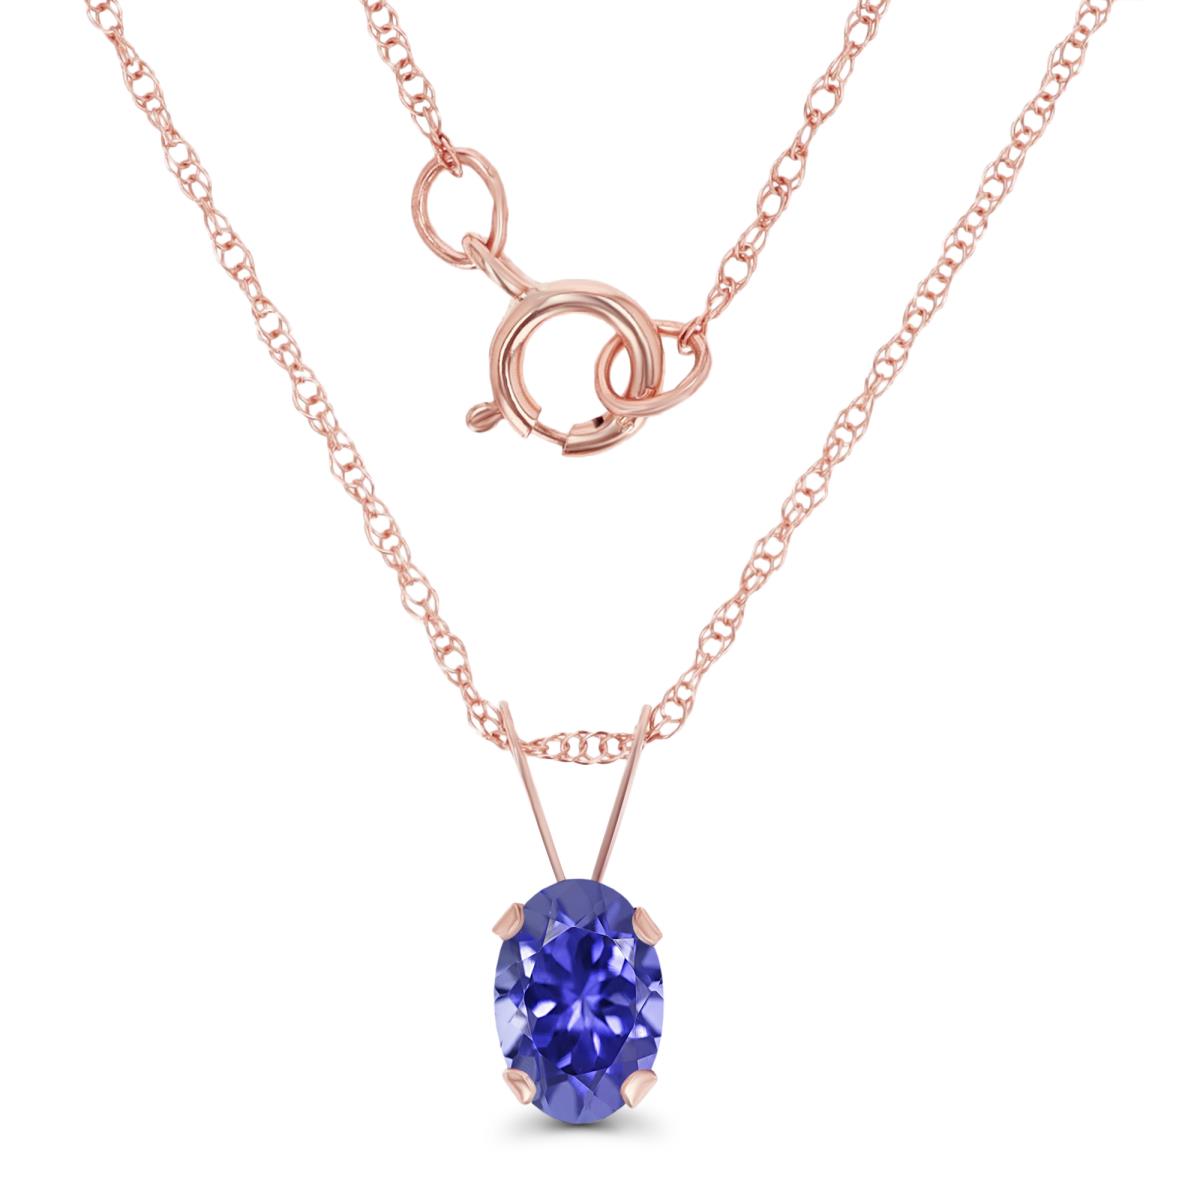 10K Rose Gold 6x4mm Oval Tanzanite 18" Rope Chain Necklace